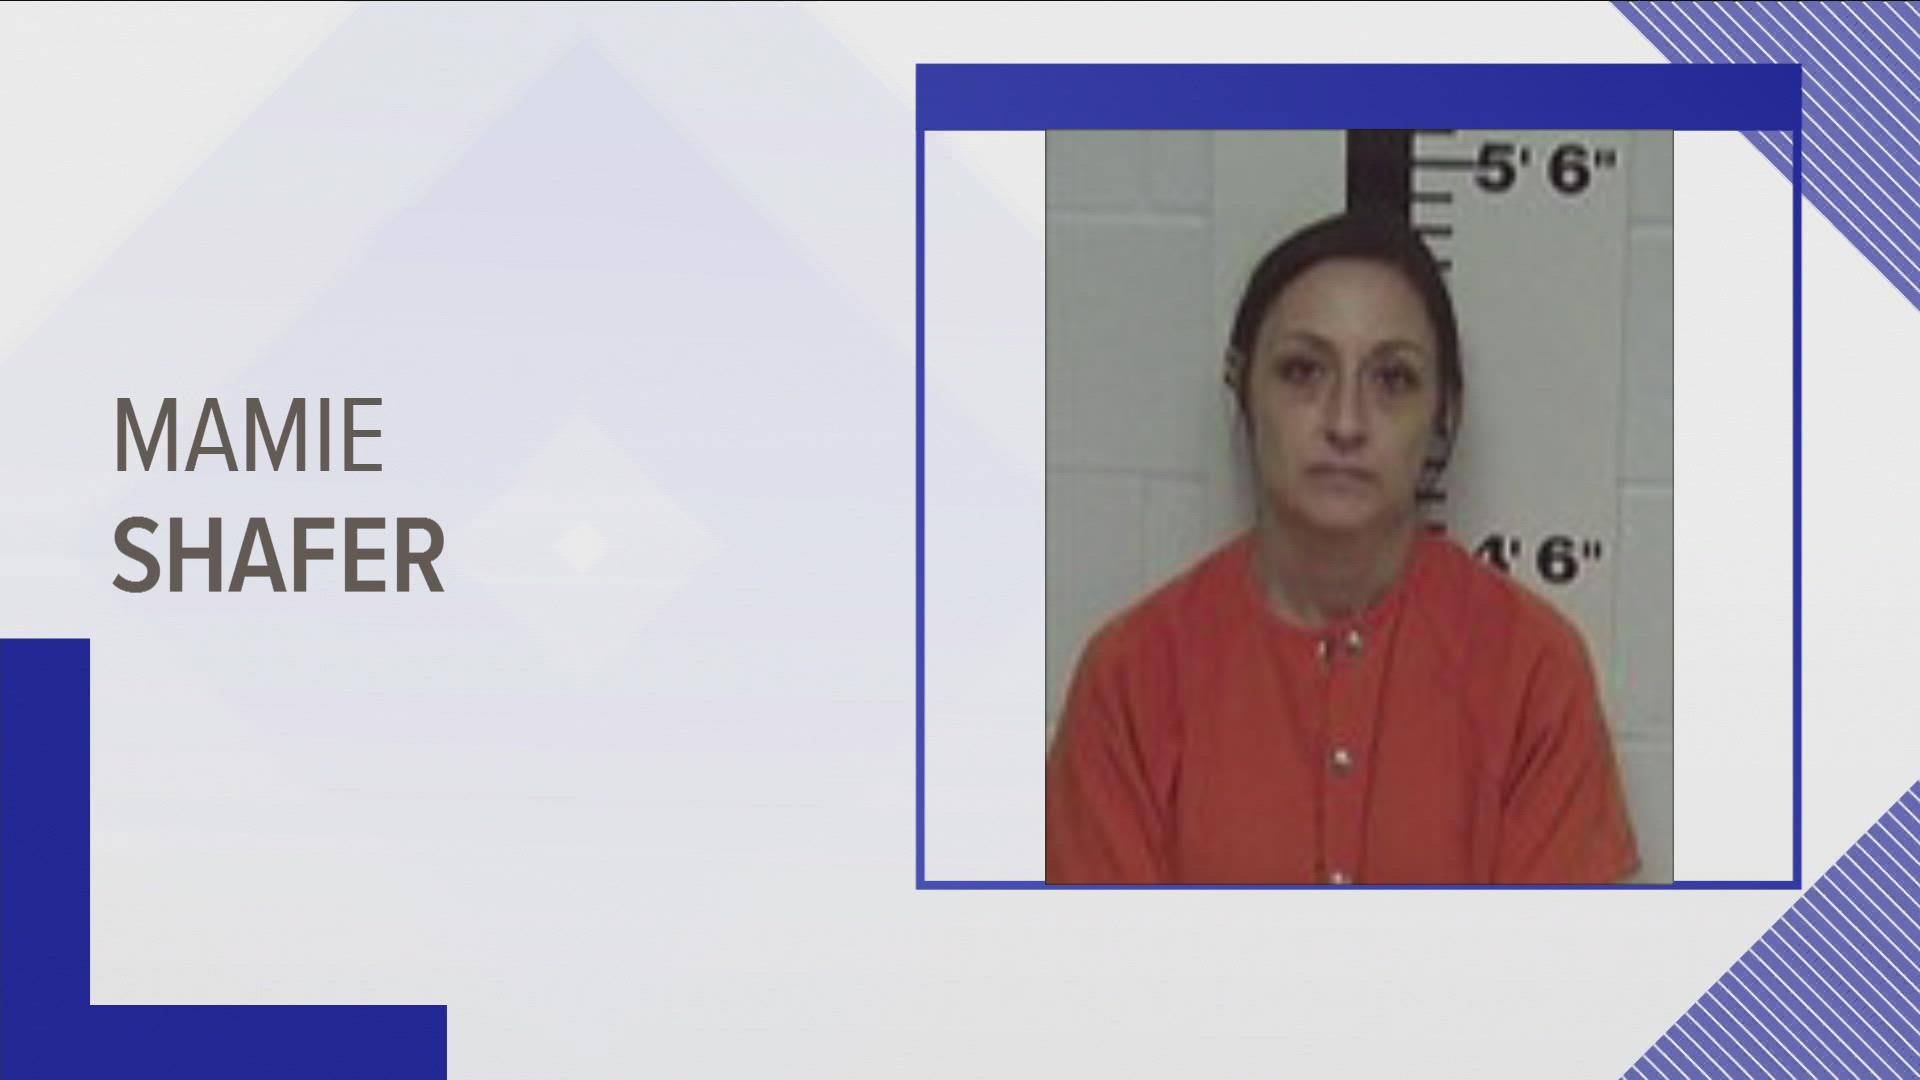 Mamie Shafer was arrested on charges of having a firearm as a convicted felon.